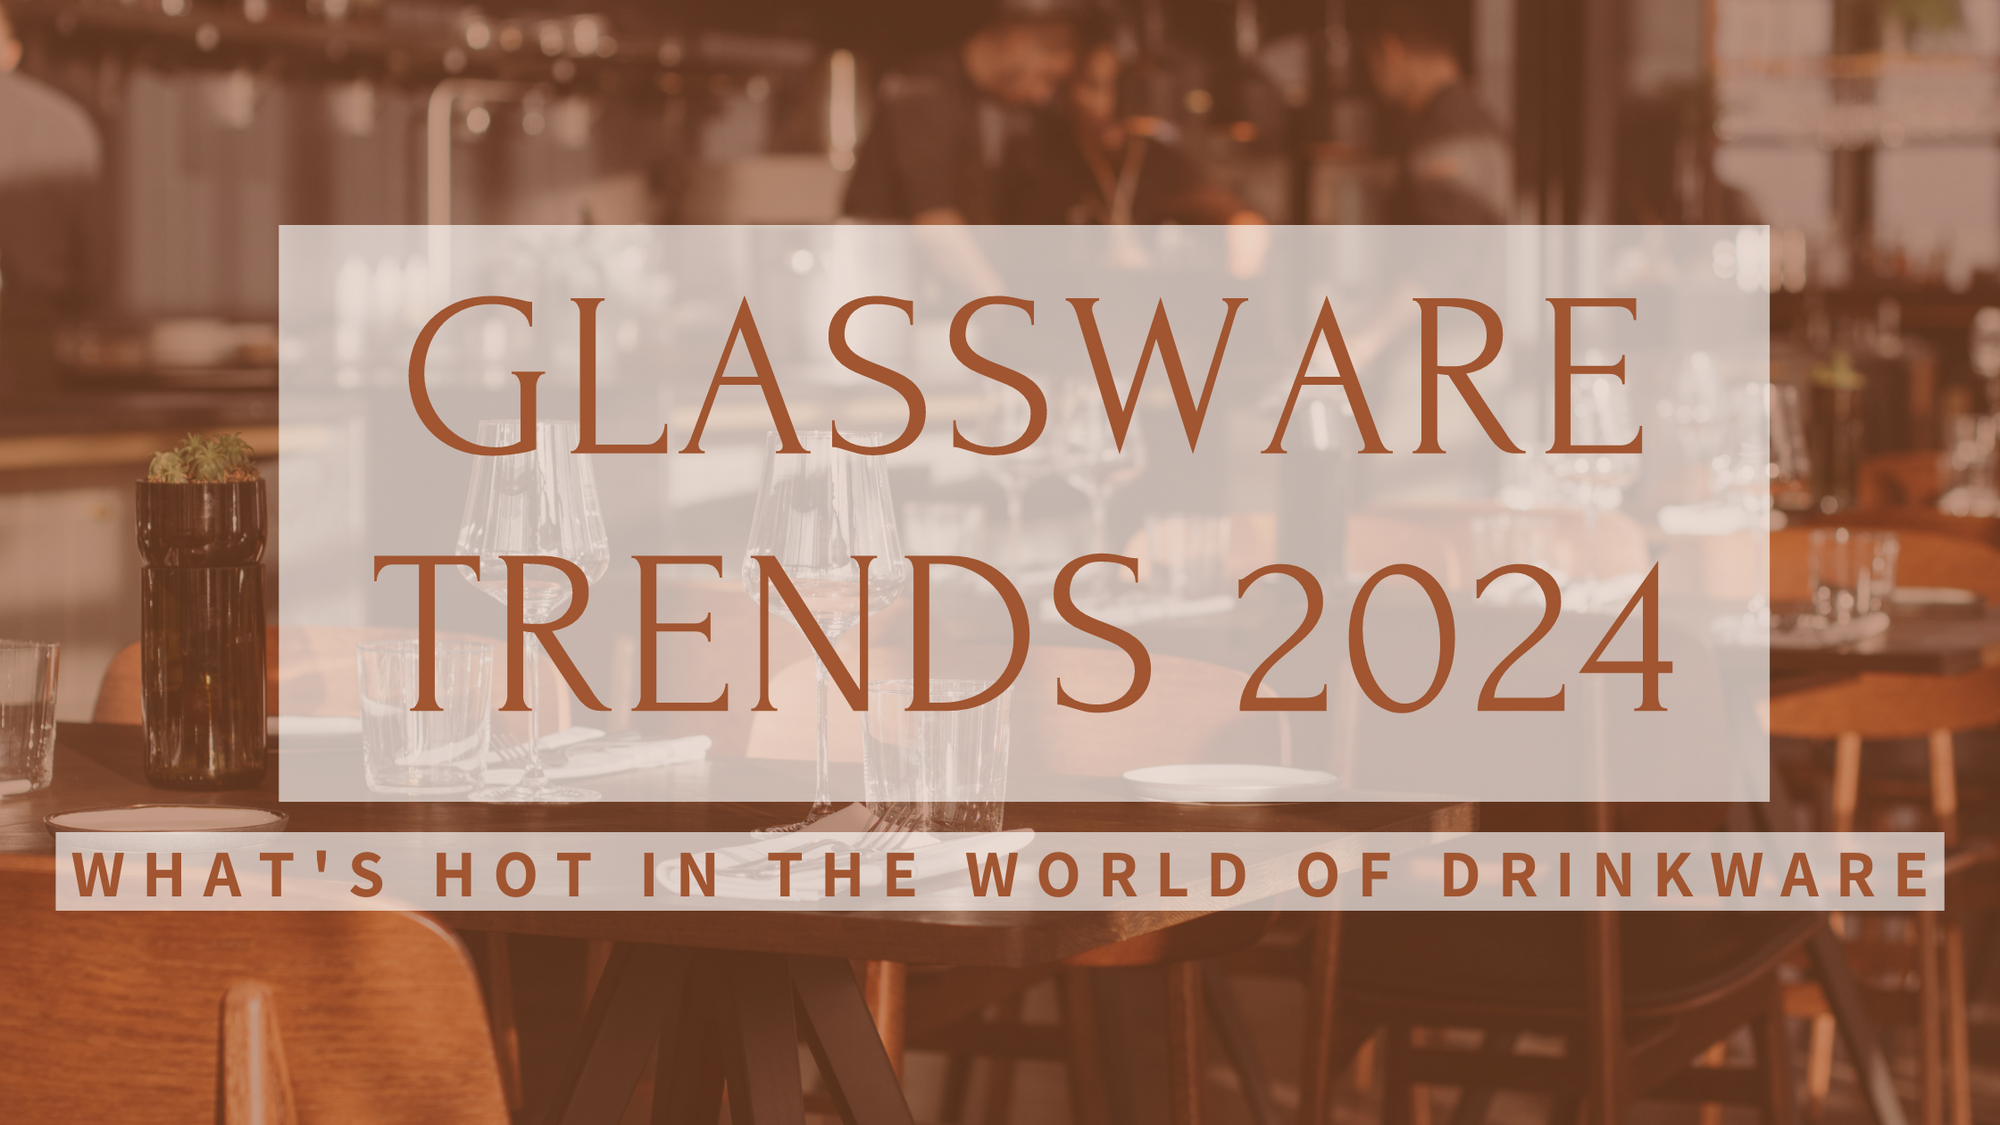 Glassware Trends 2024: What's Hot in the World of Drinkware